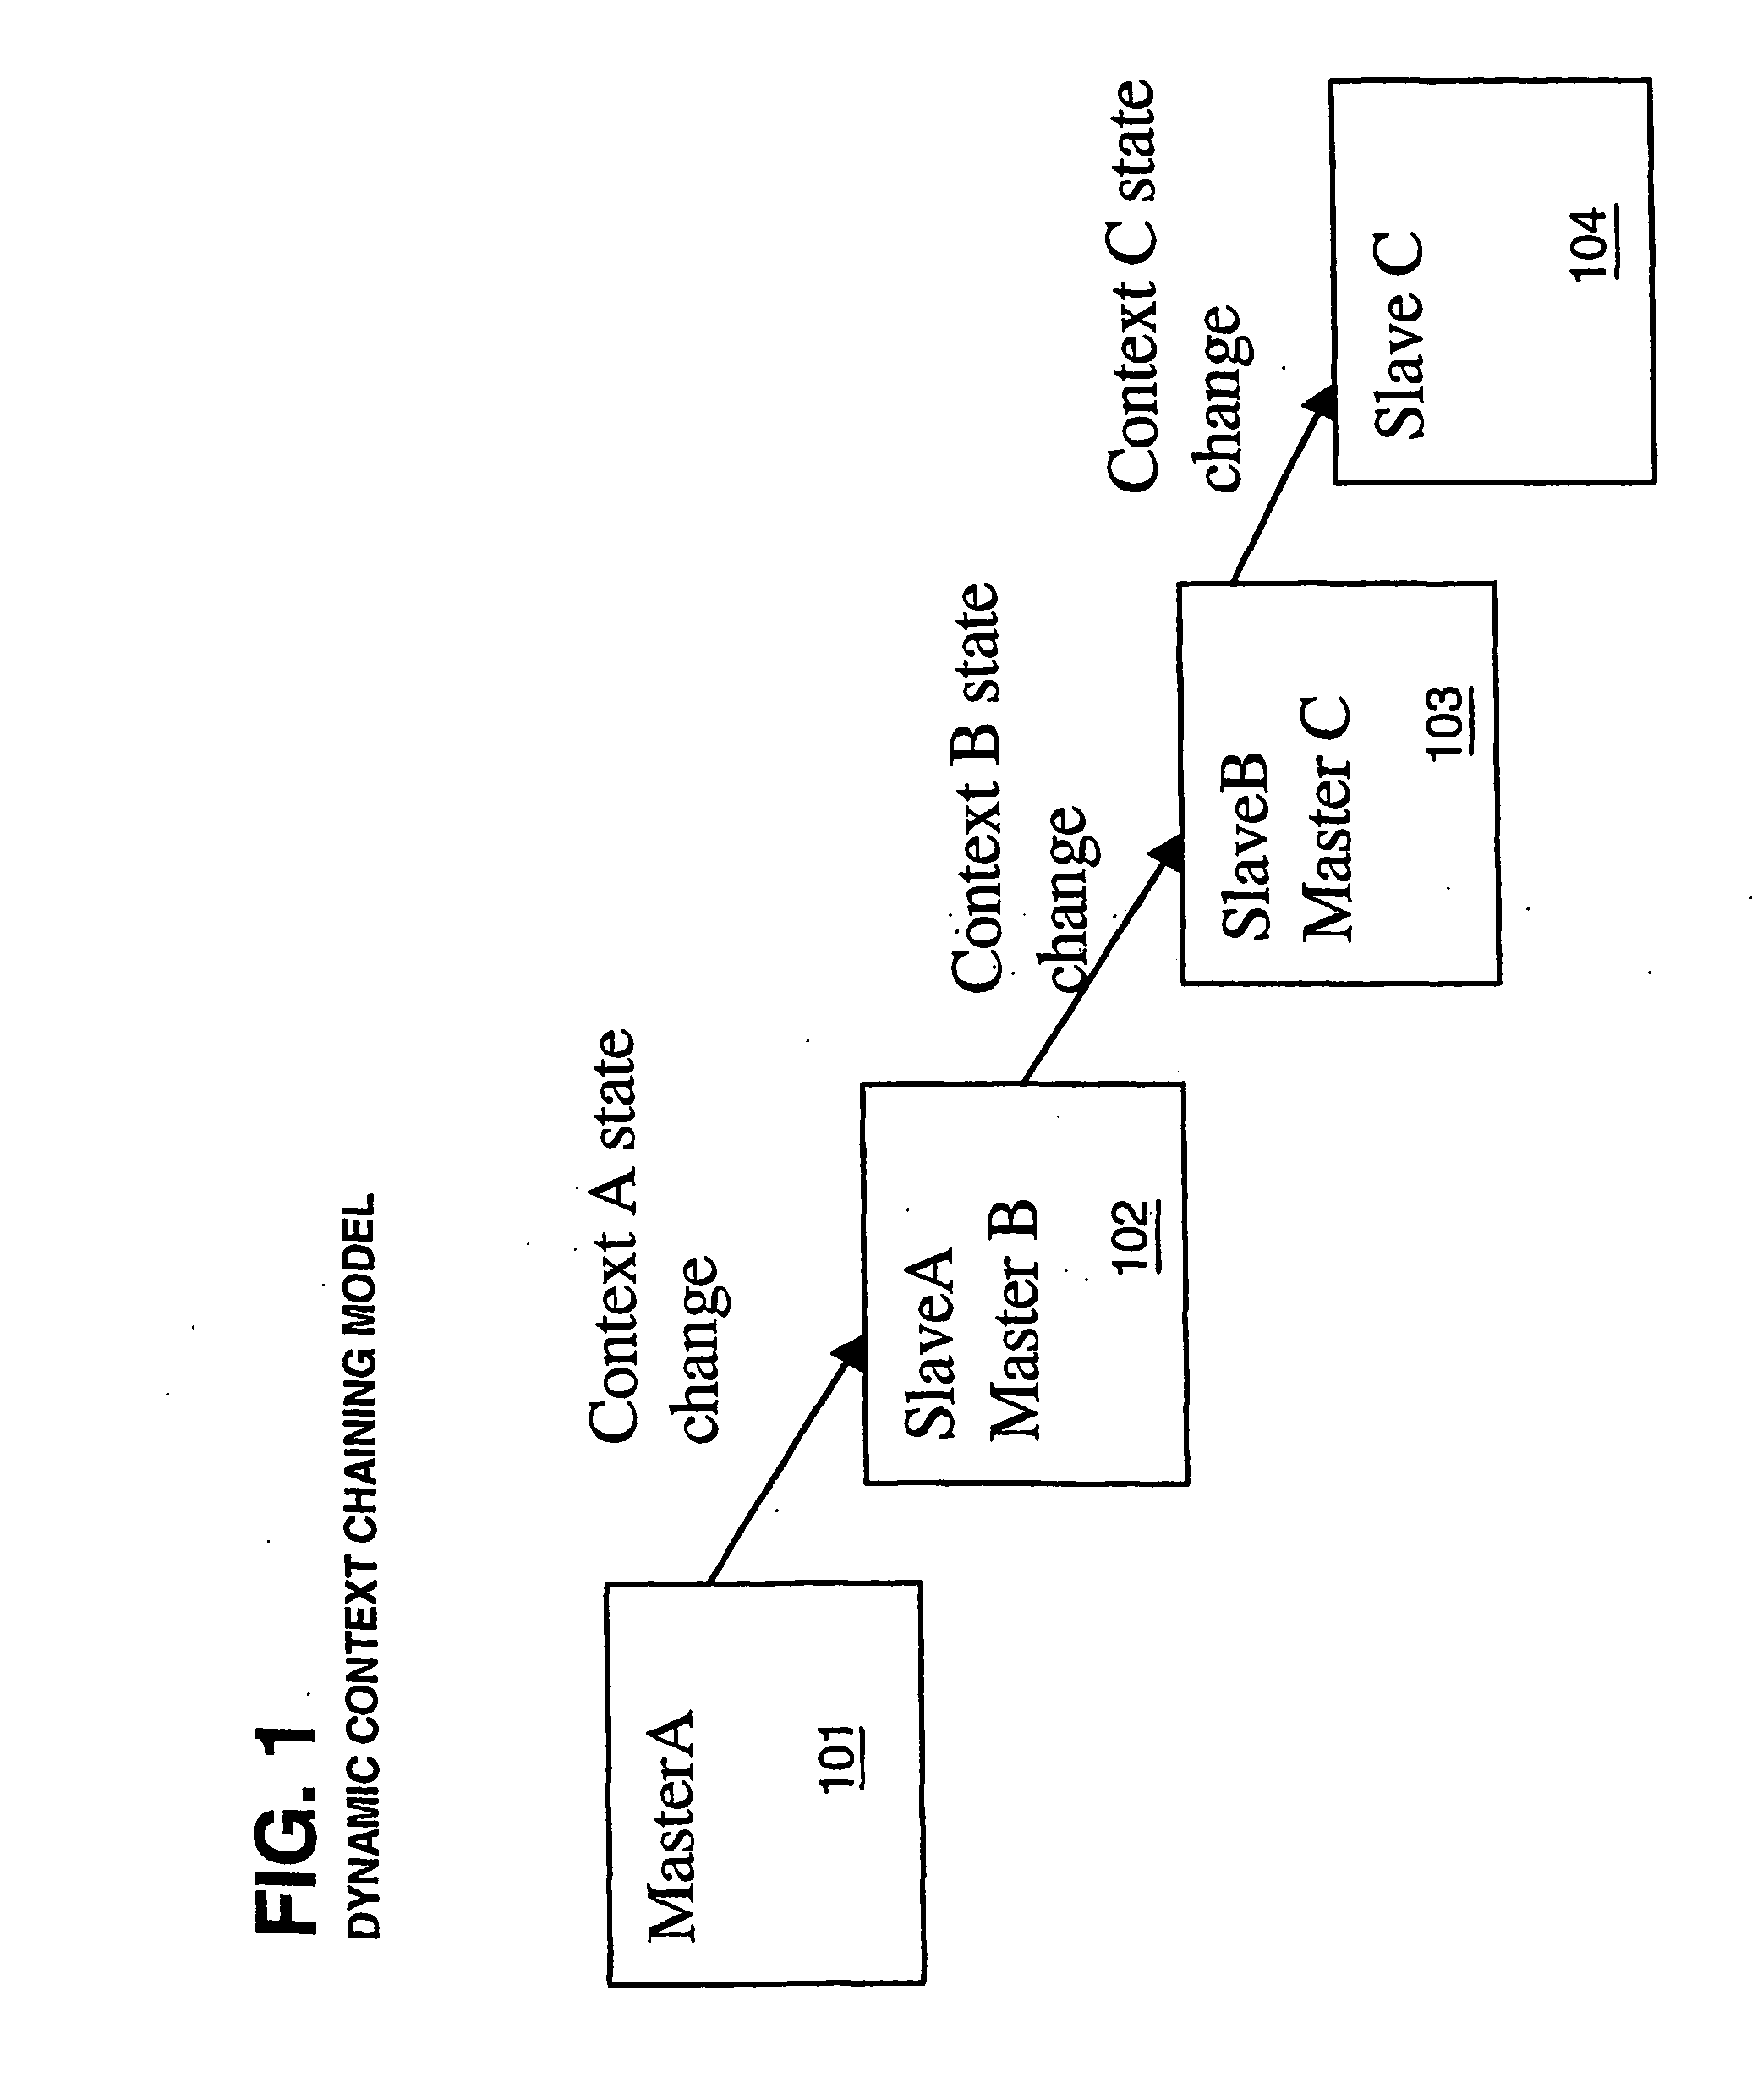 Method and apparatus for using business rules or user roles for selecting portlets in a web portal